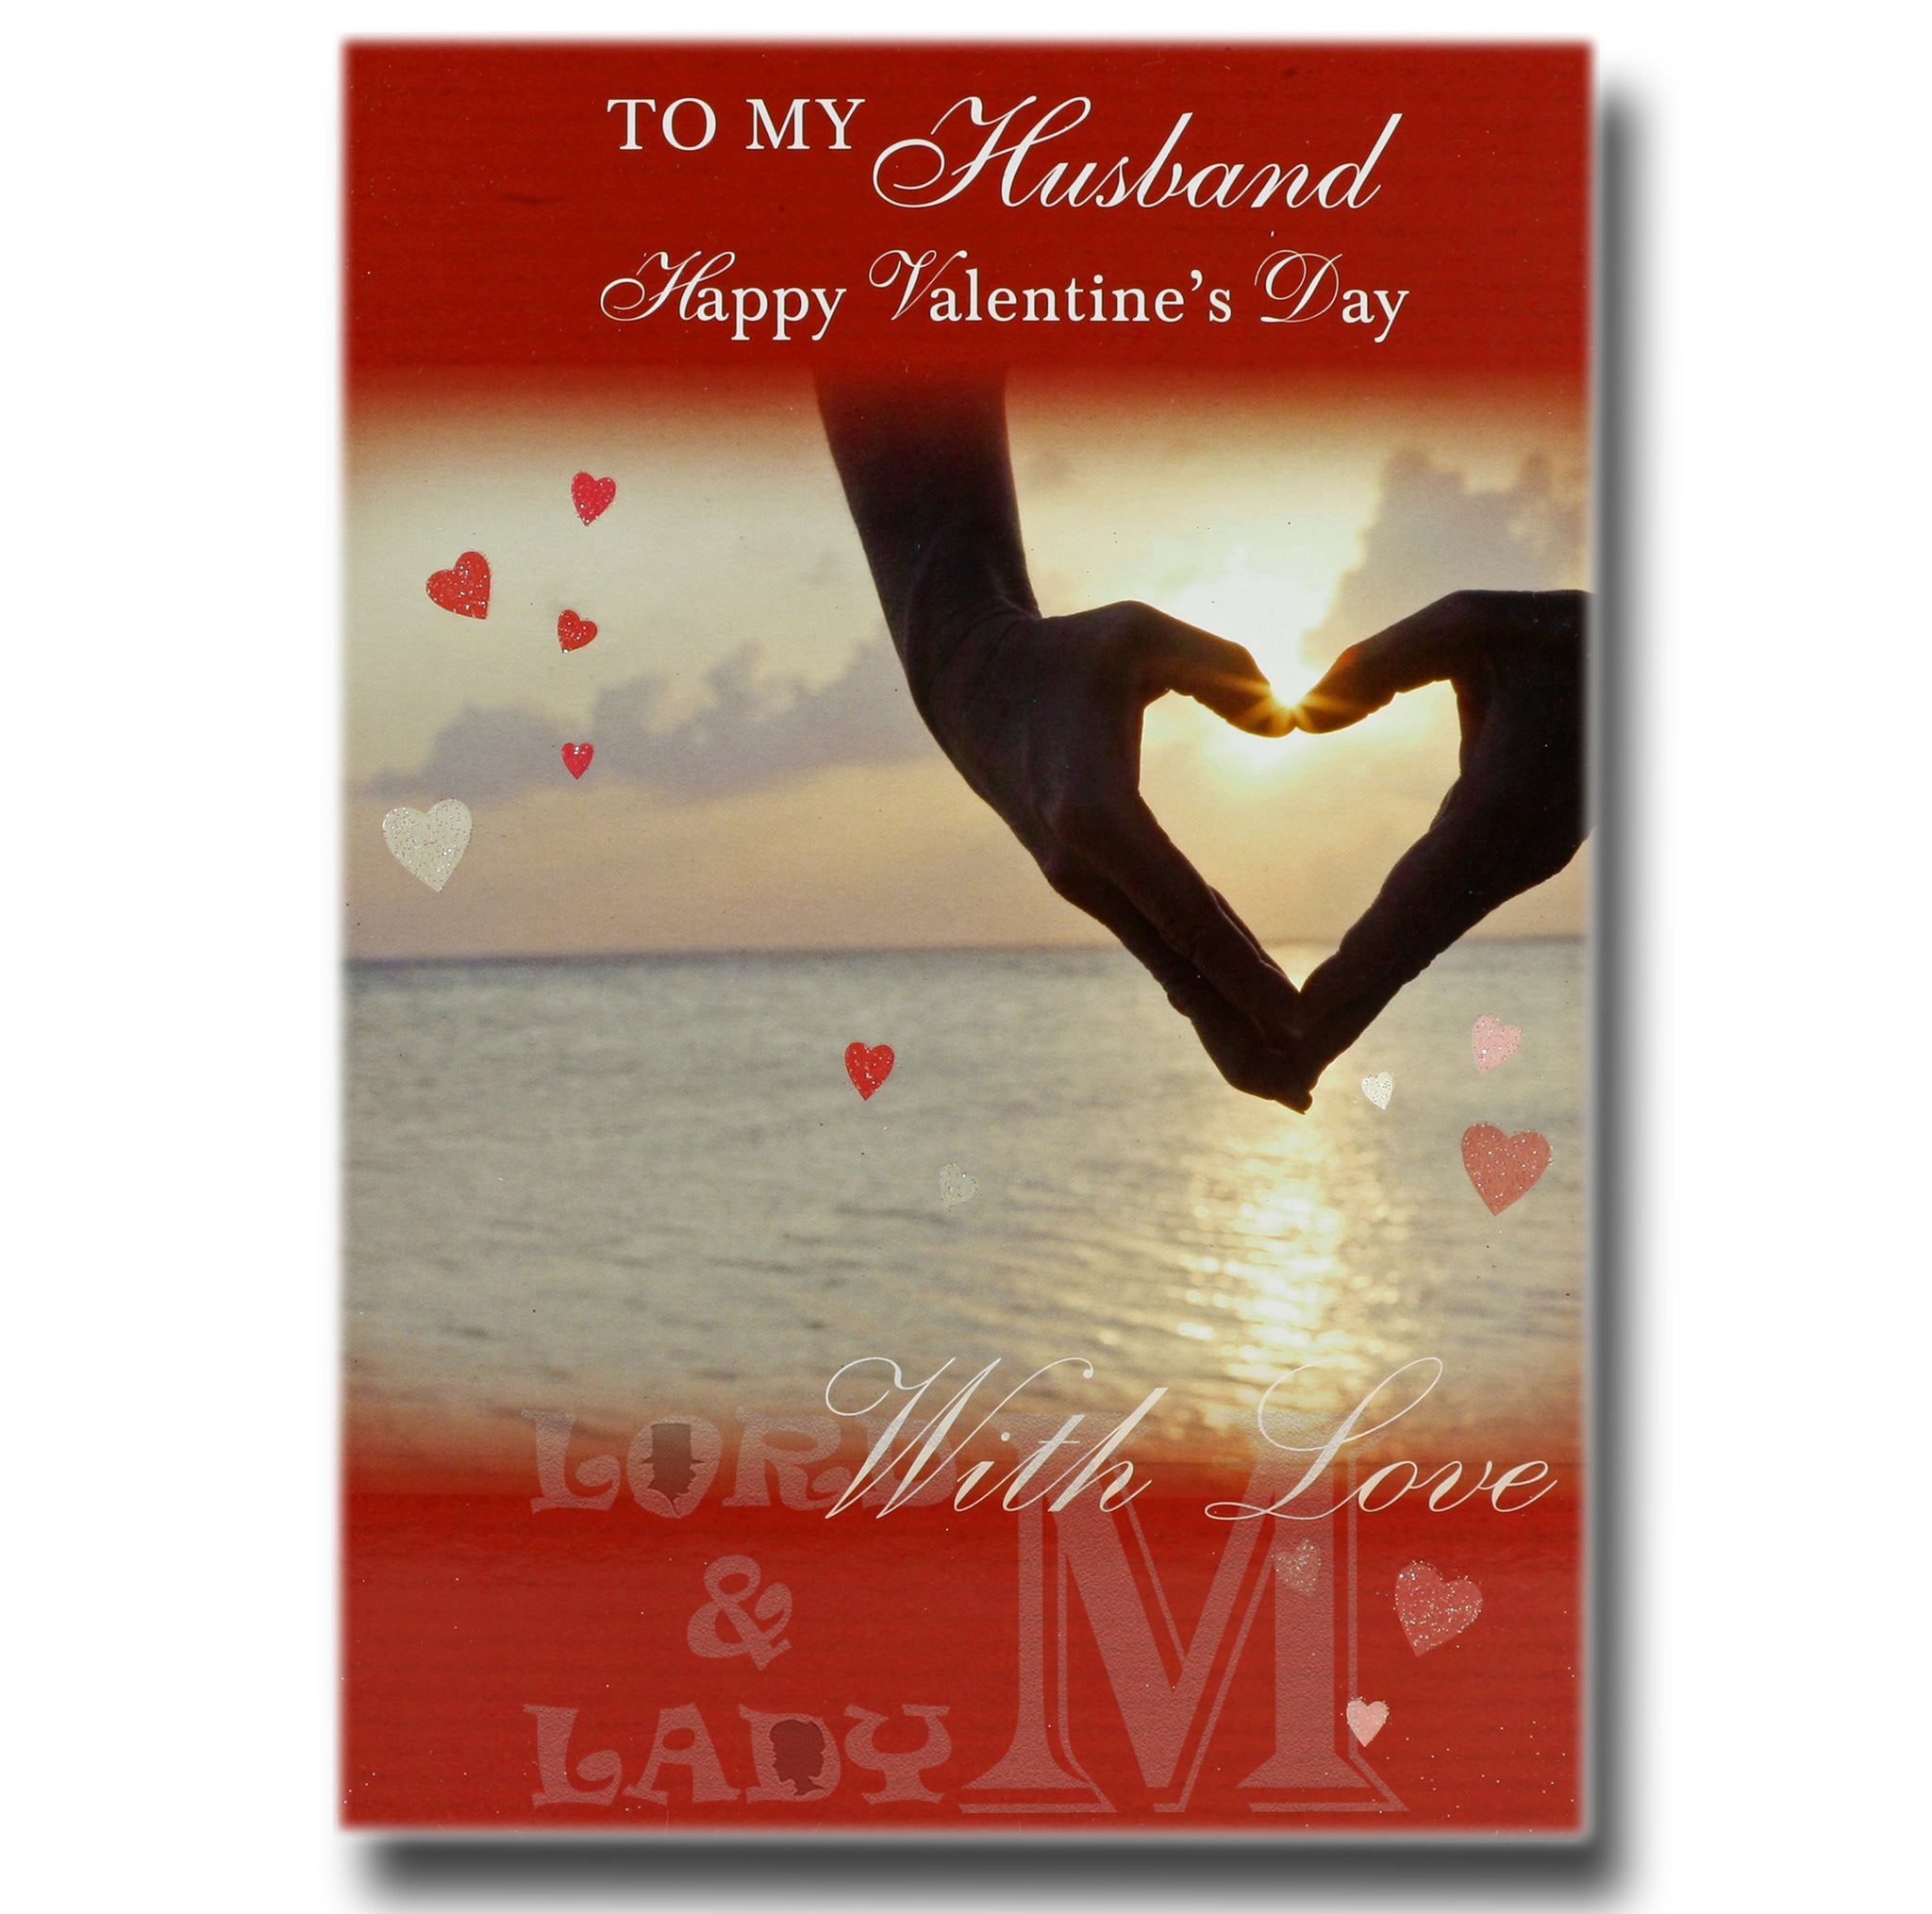 husband-valentine-s-day-cards-greetings-wishes-various-designs